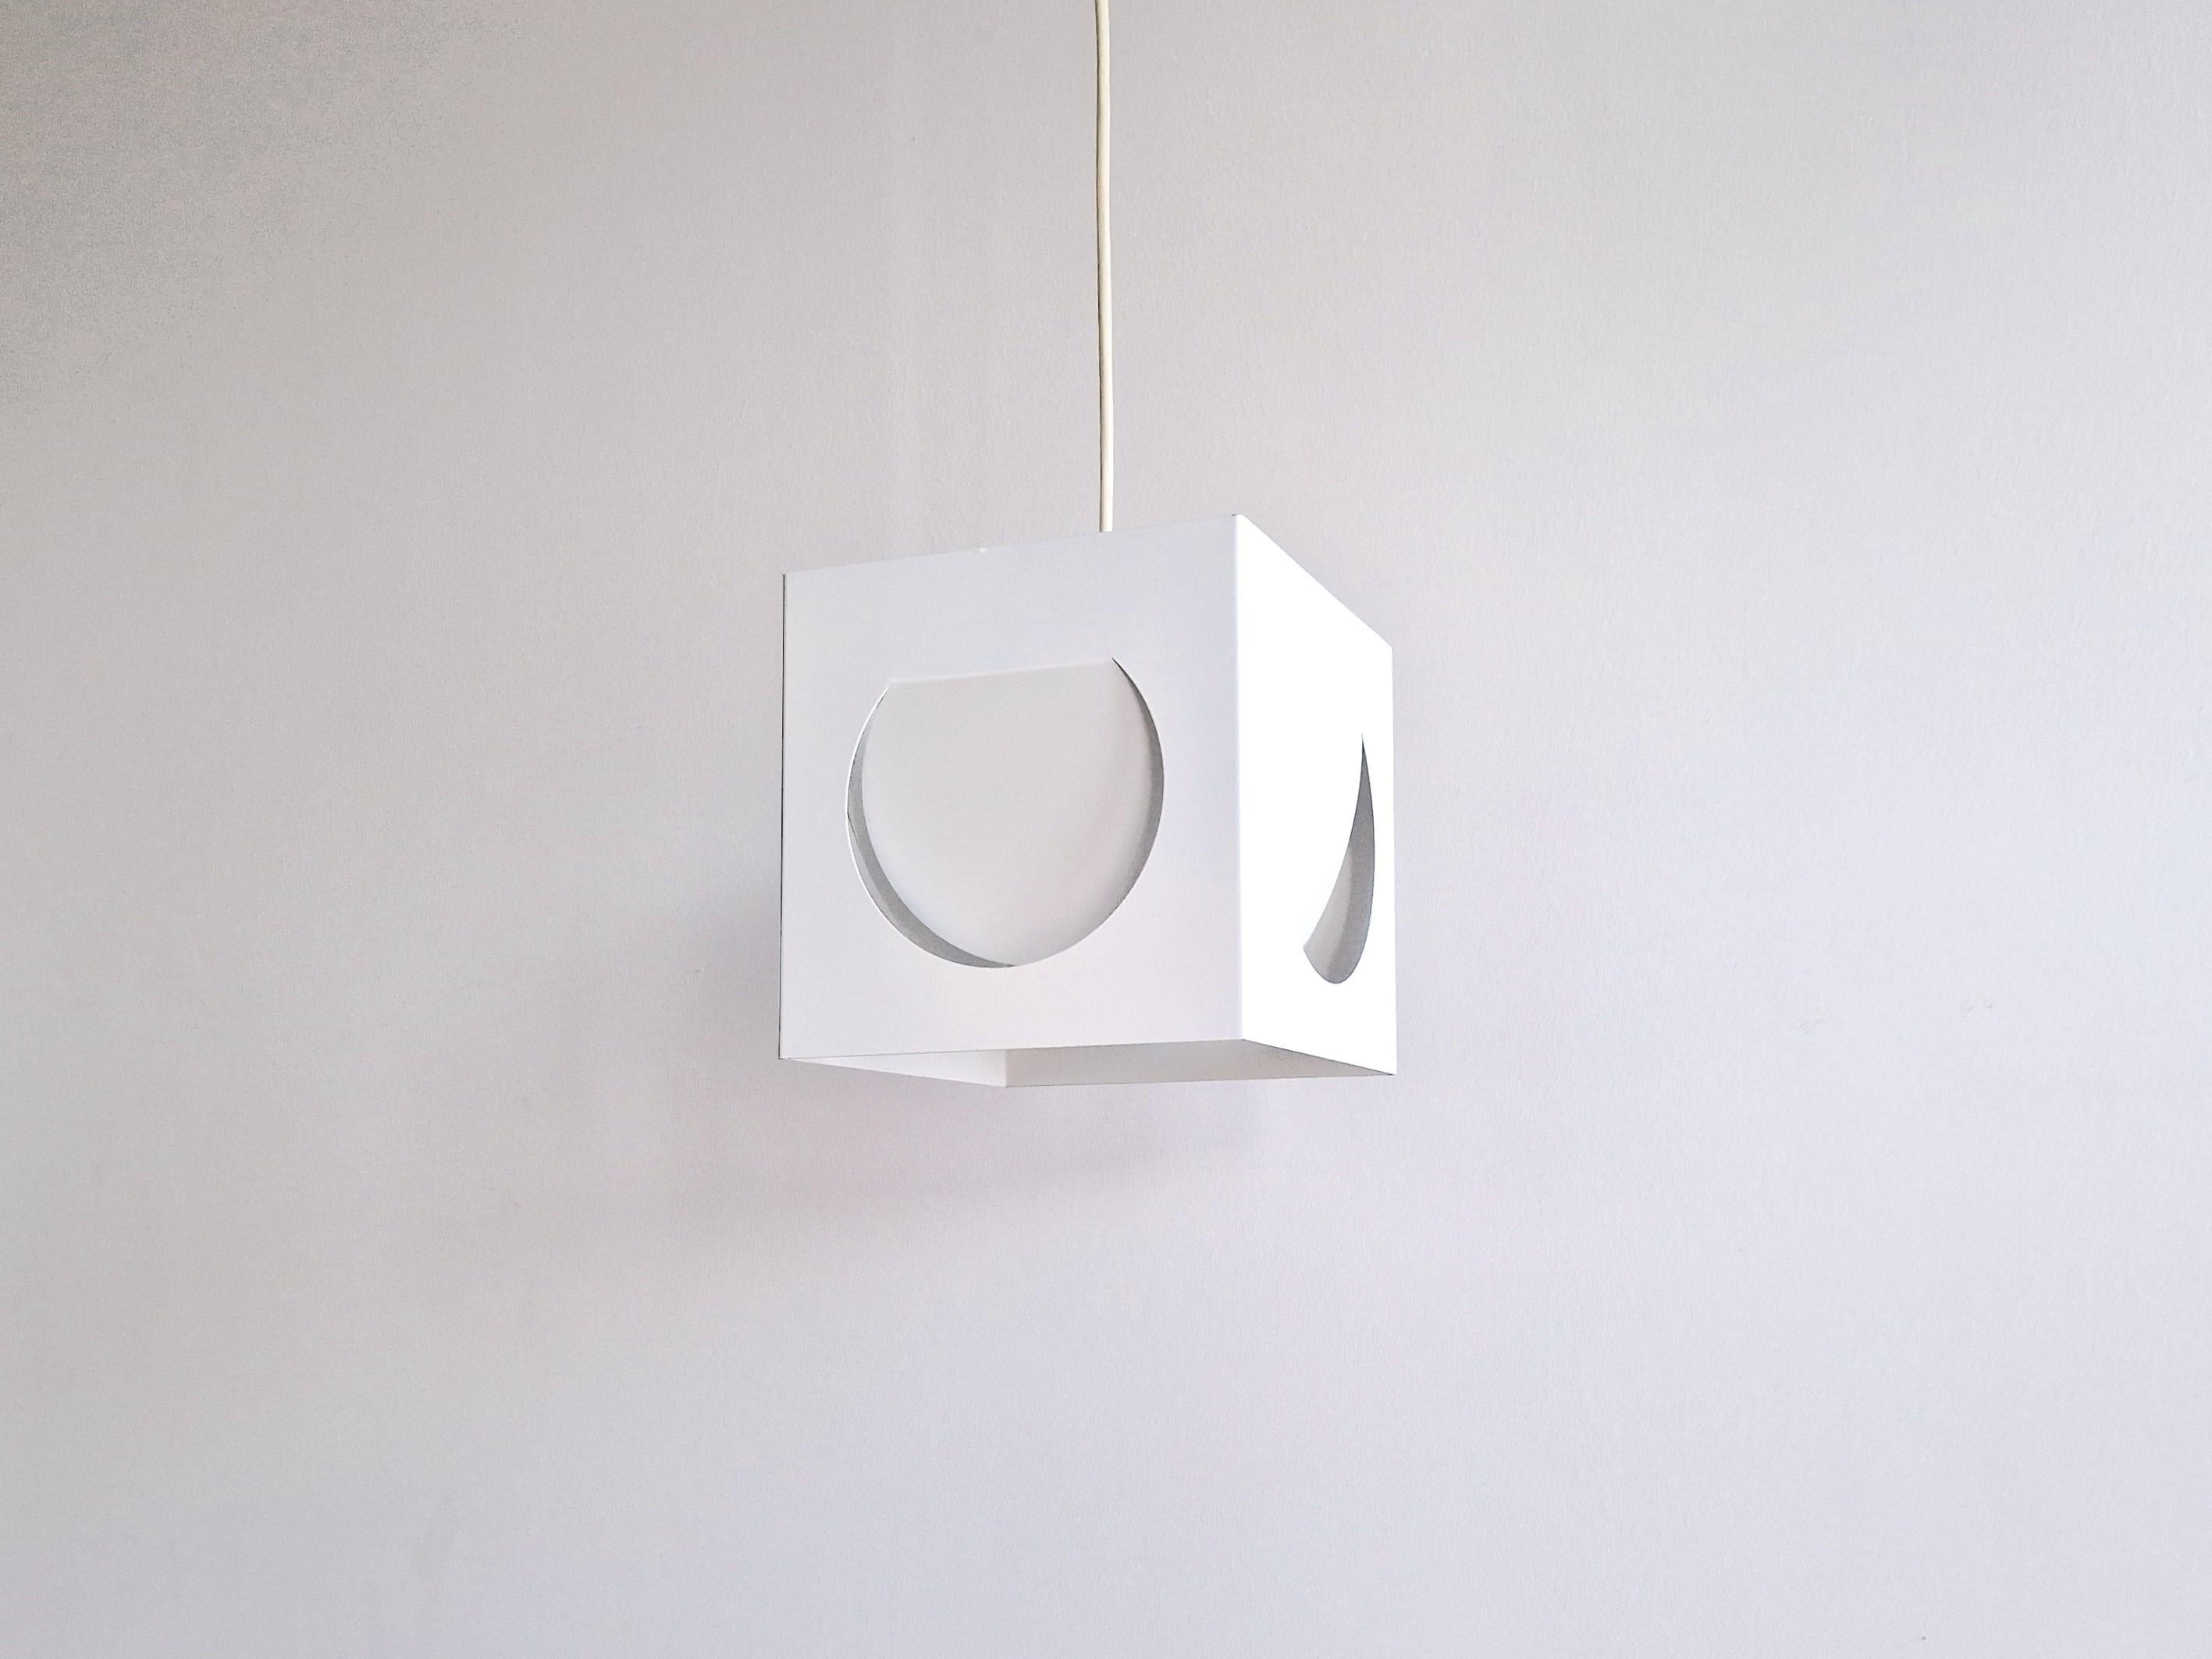 This geometric shaped pendant lamp, model 61-193, was designed by Shogo Suzuki for Orno in the early 1960's. It was designed after an exchange project beween Finnish and Japanese designers. Shogo Suzuki came to work with Lisa Johansson Pape at Orno.